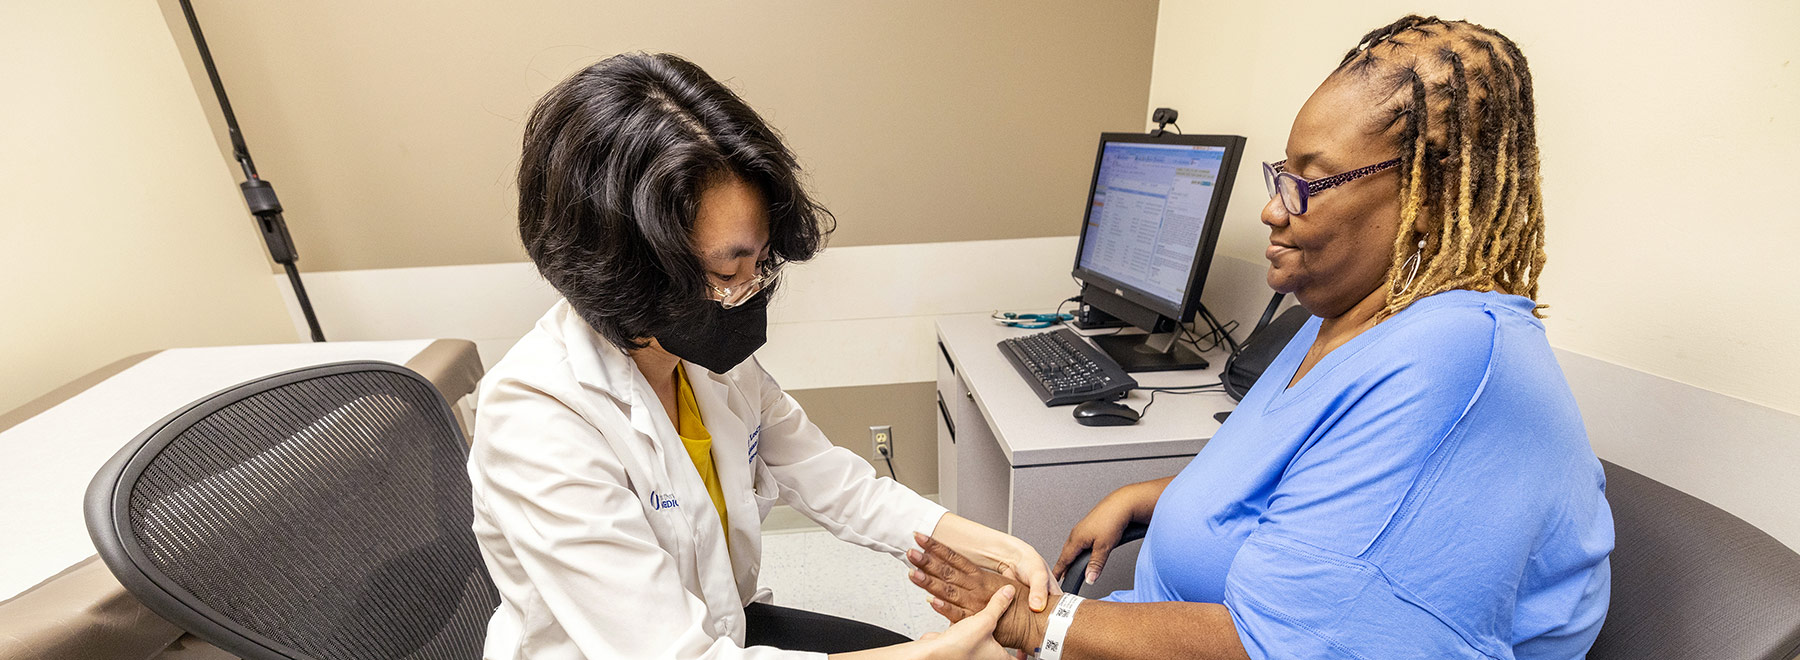 While both are seated and facing each other, Dr. Cathy Lee Ching examines a patient's hand in an exam room.